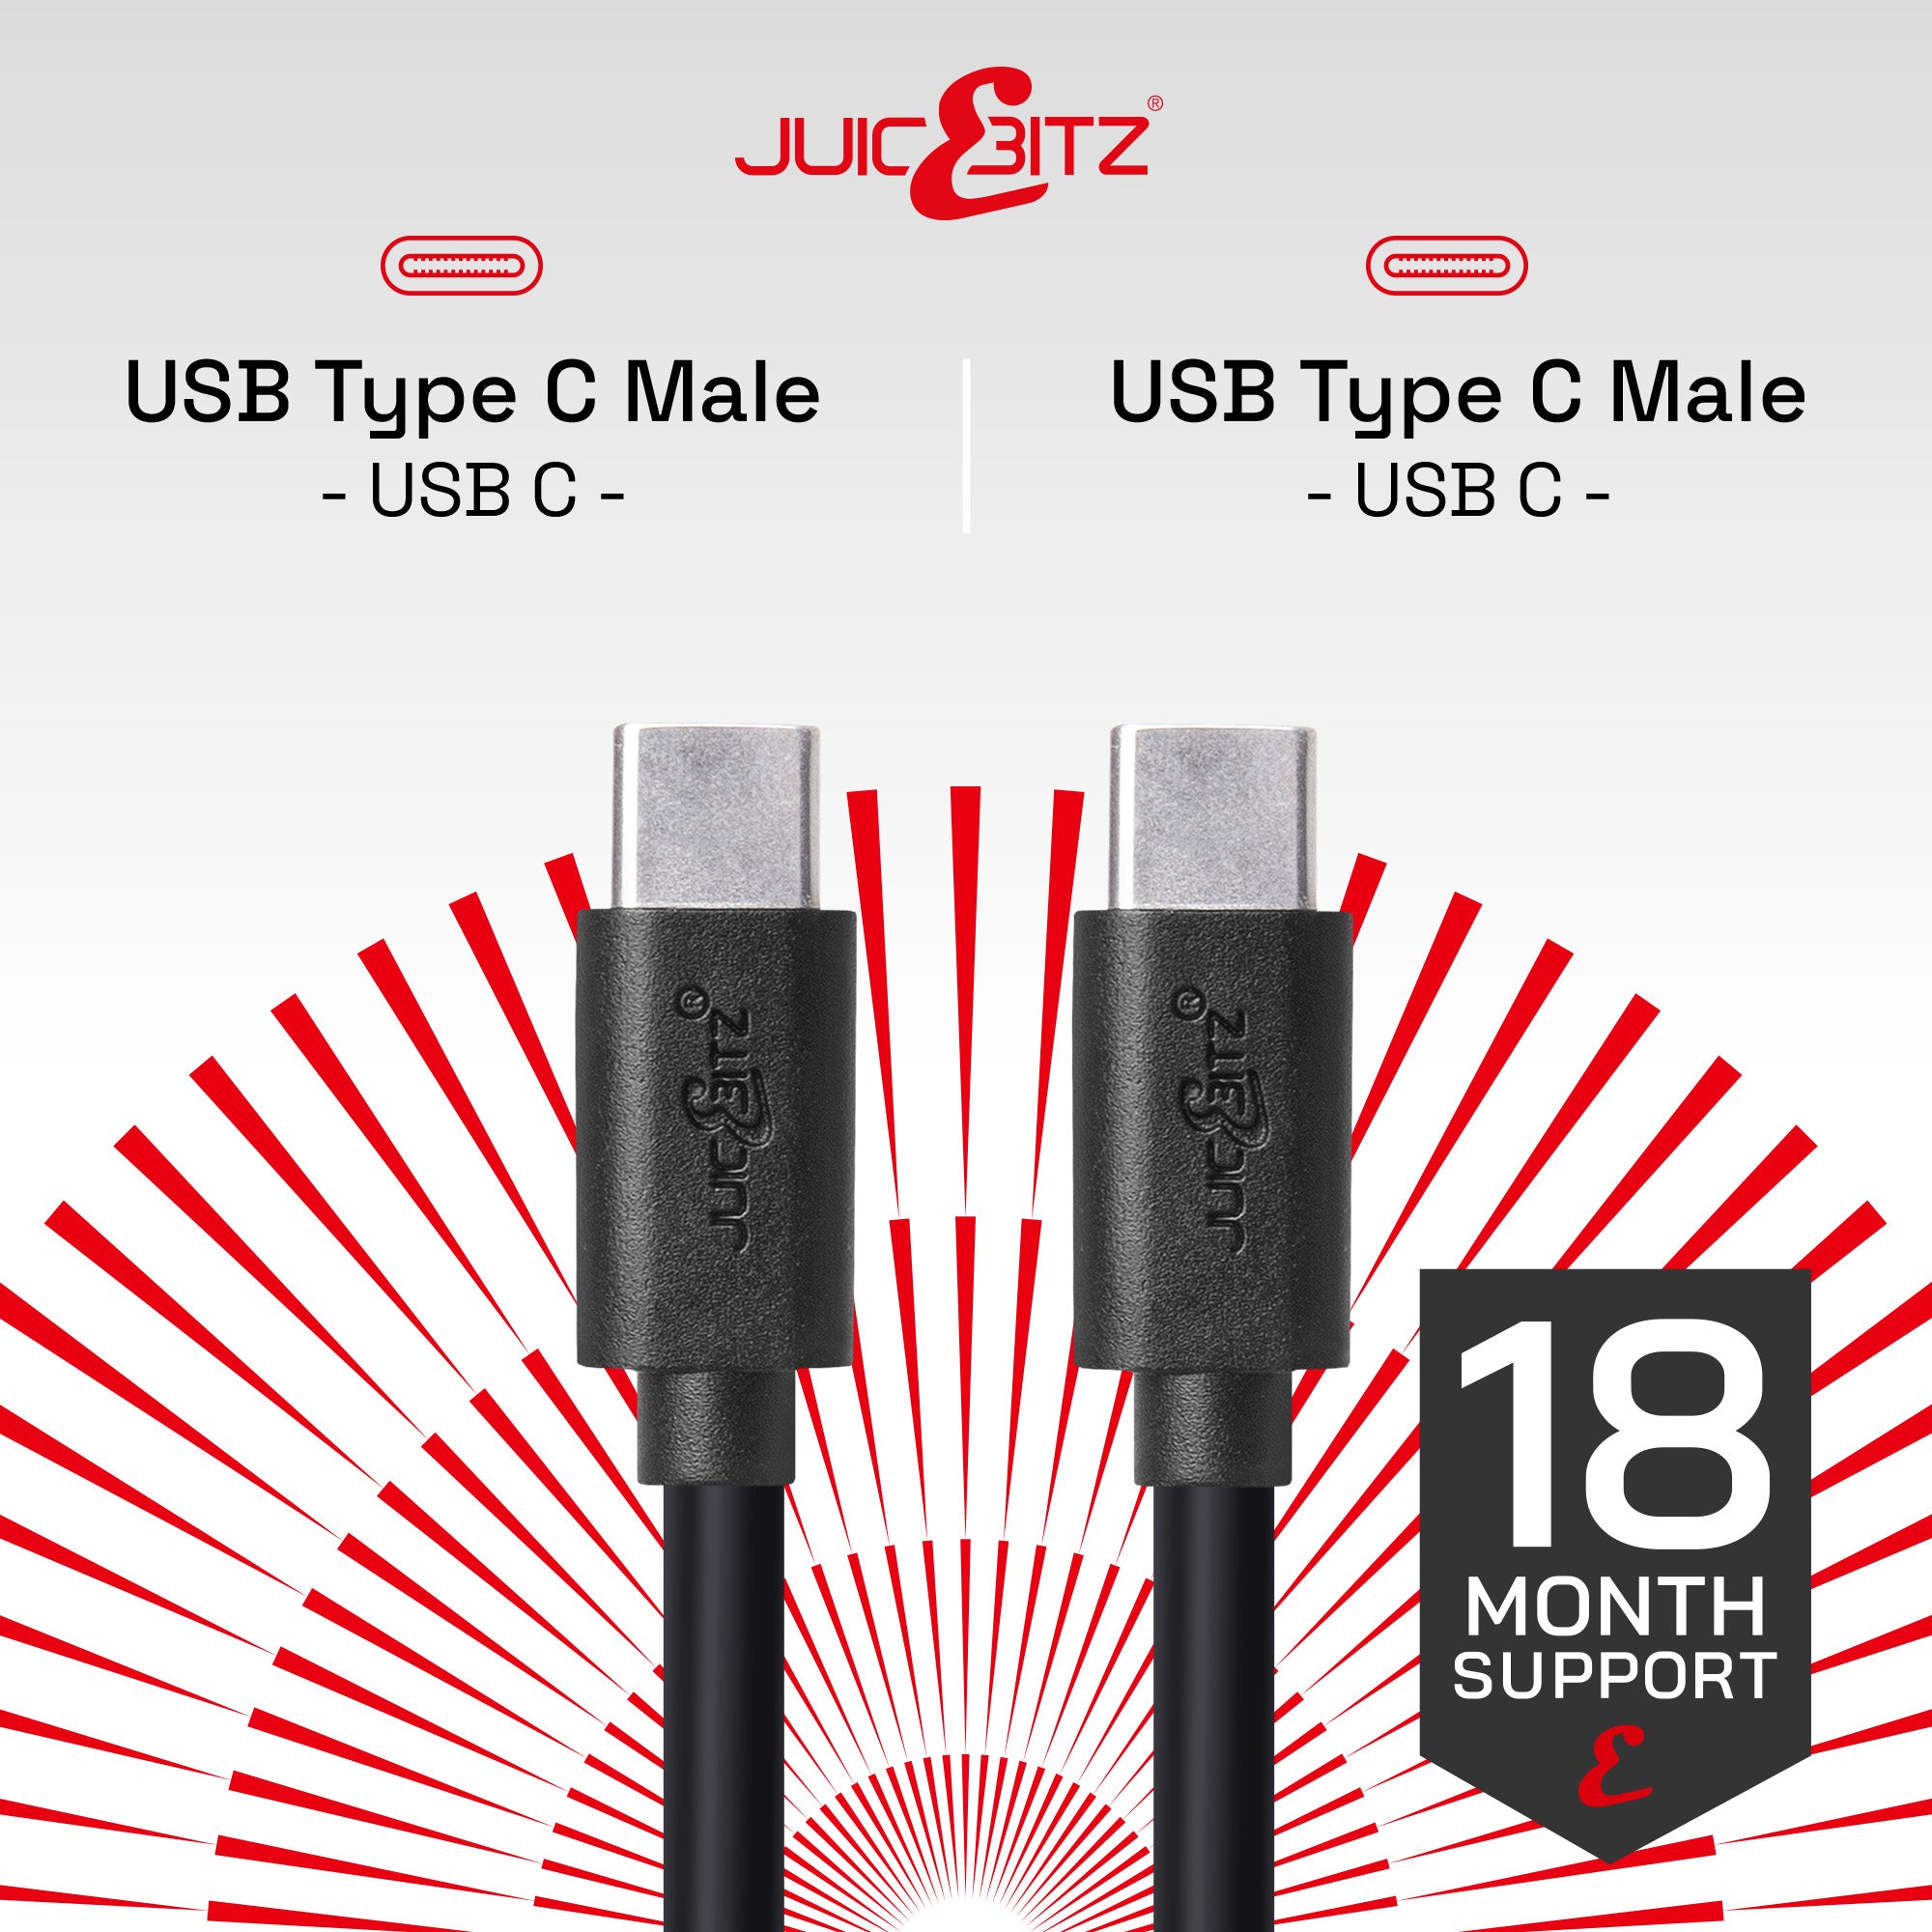 USB-C to USB-C 3A Charger Cable USB 2.0 Data Transfer Lead - Black